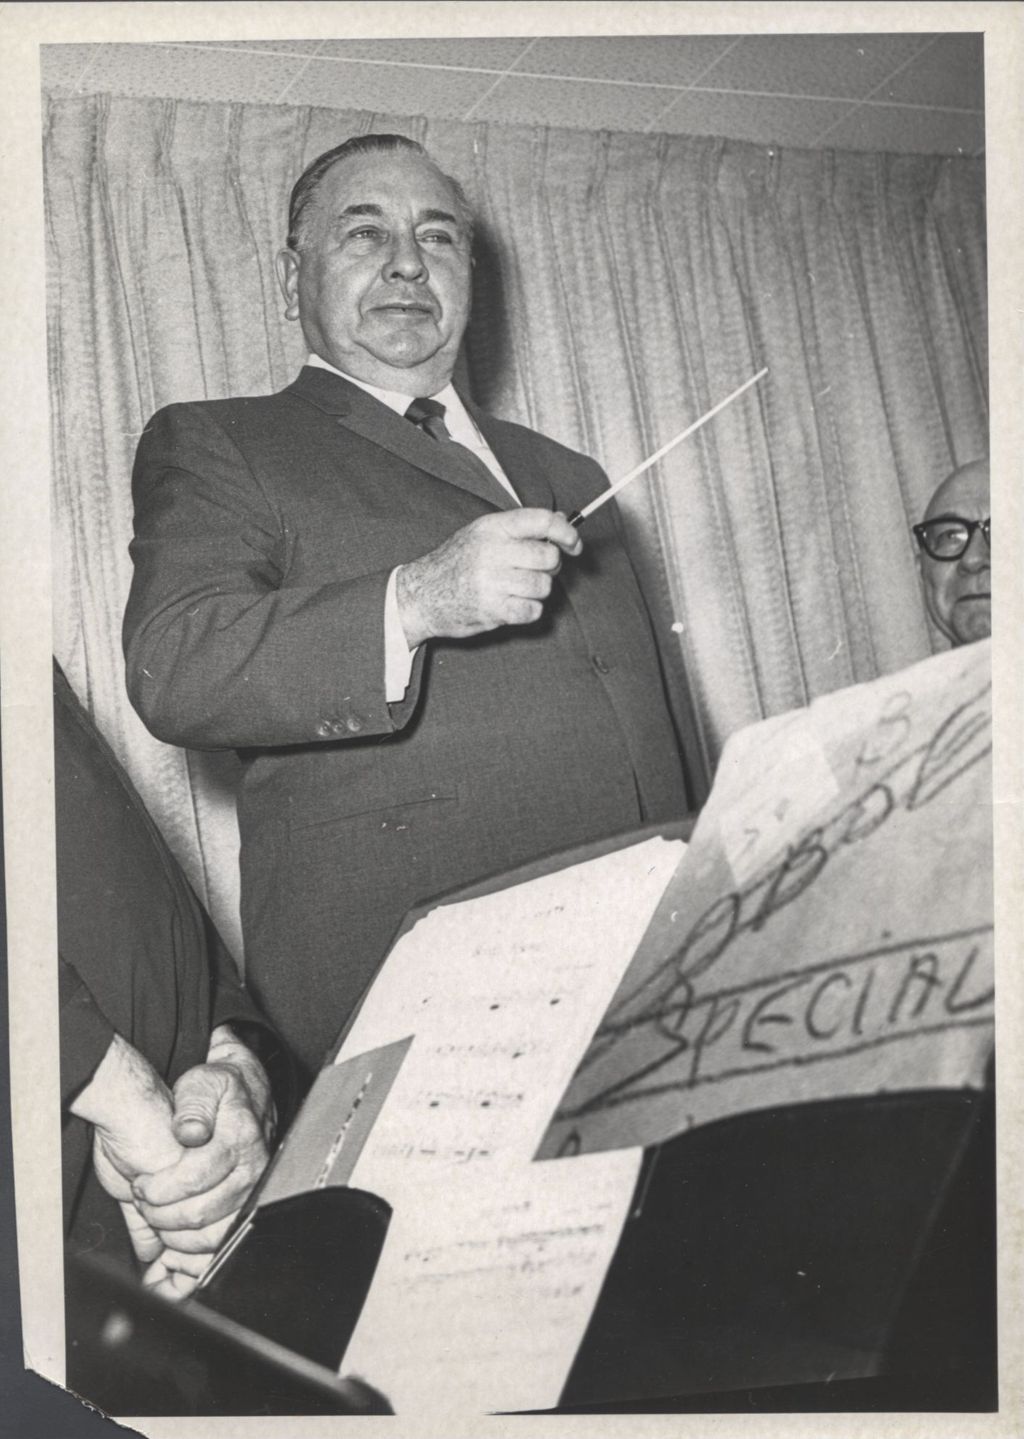 Miniature of Richard J. Daley with a conductor's baton